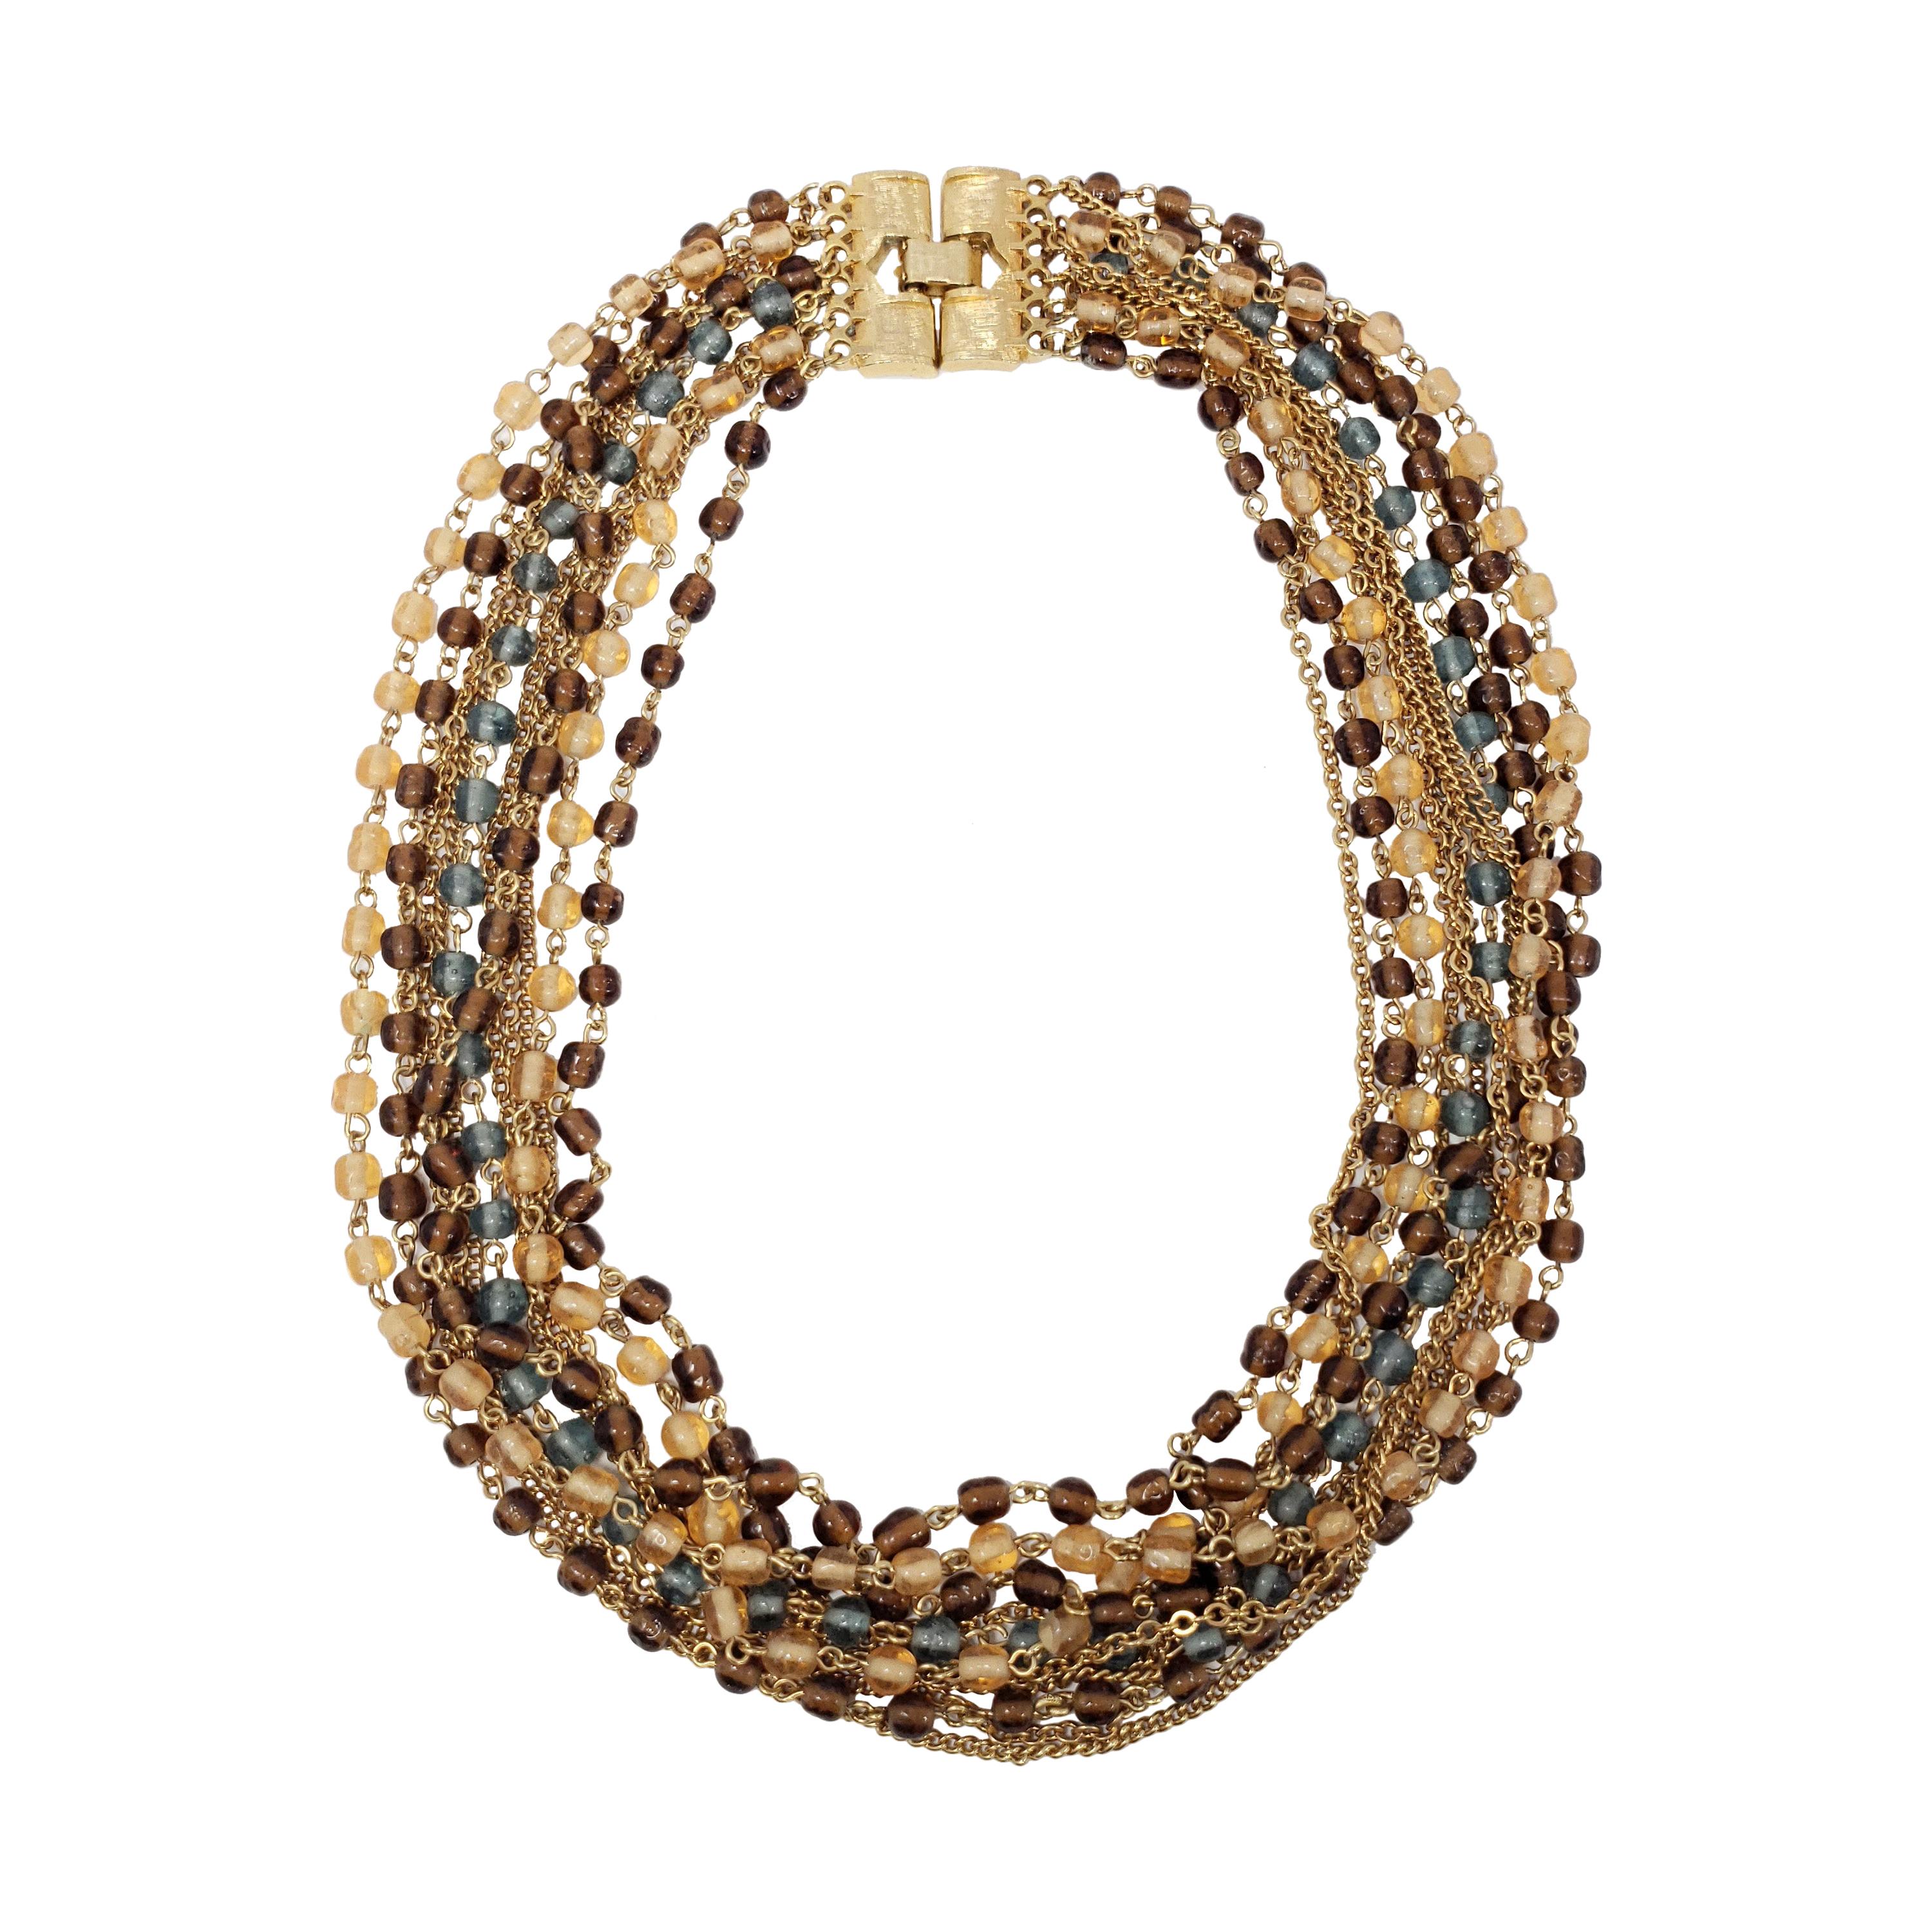 Retro Multi Strand Topaz Crystal and Chain Necklace in Gold, Late 1900s